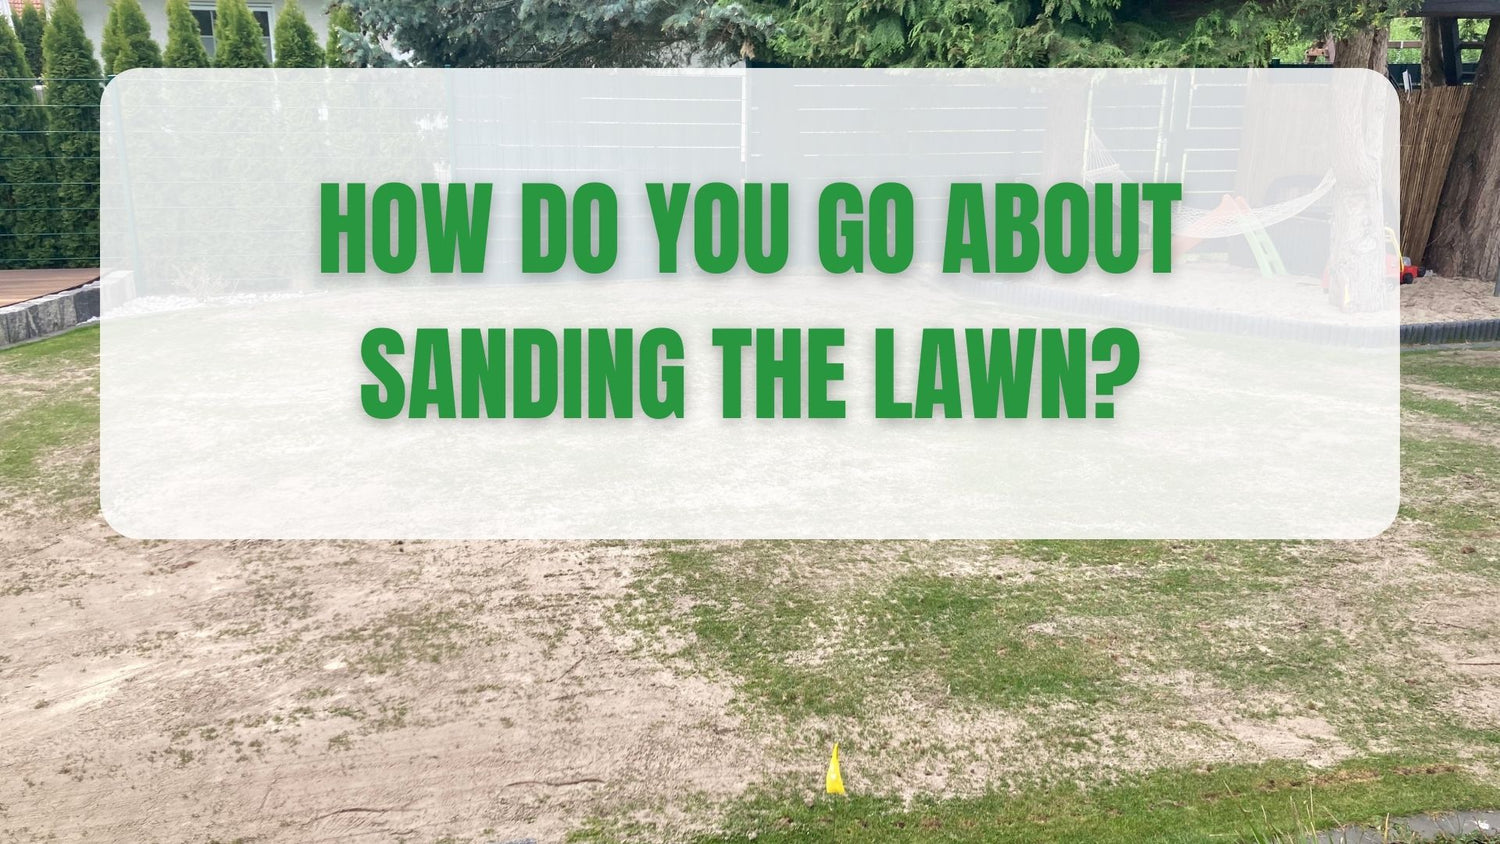 How do you go about sanding the lawn?